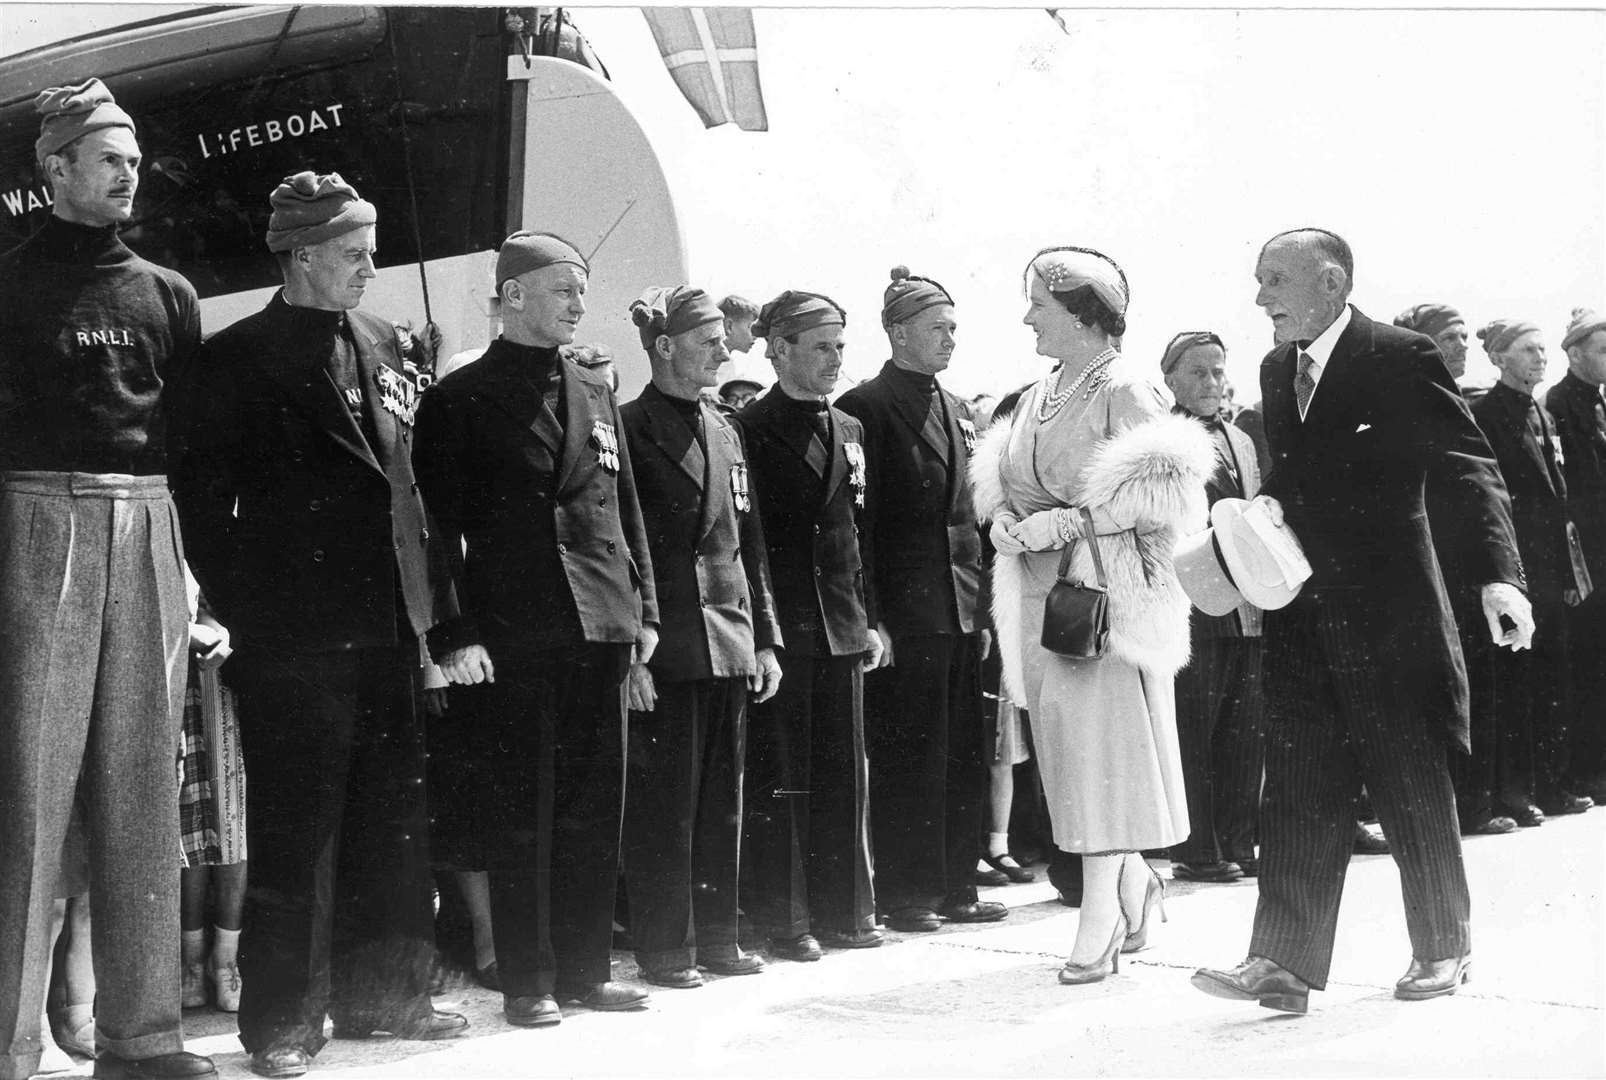 The lifeboatmen of Walmer lined up to welcome the Queen Mother when she arrived at the station to present a certificate to mark its centenary in May 1956. The same day she opened an accommodation block at the Royal Marines Depot at Deal